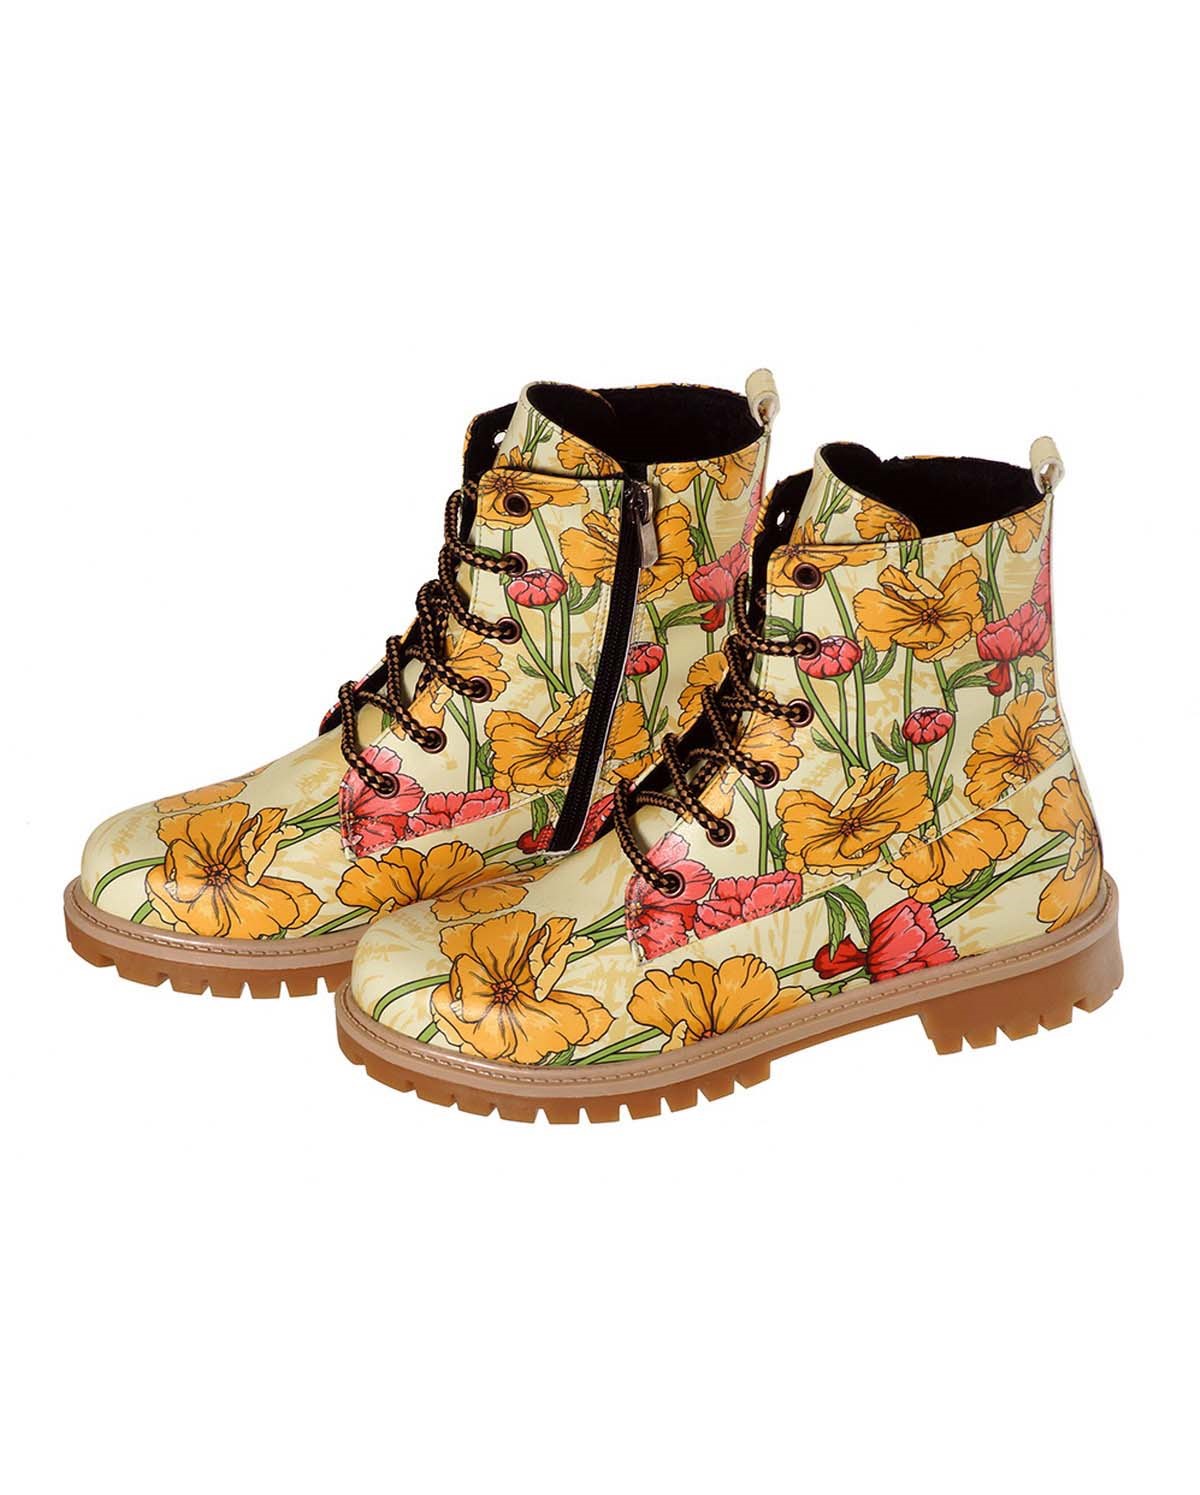 Yellow Floral Floral Pattern Lace-Up Women's Short Boots